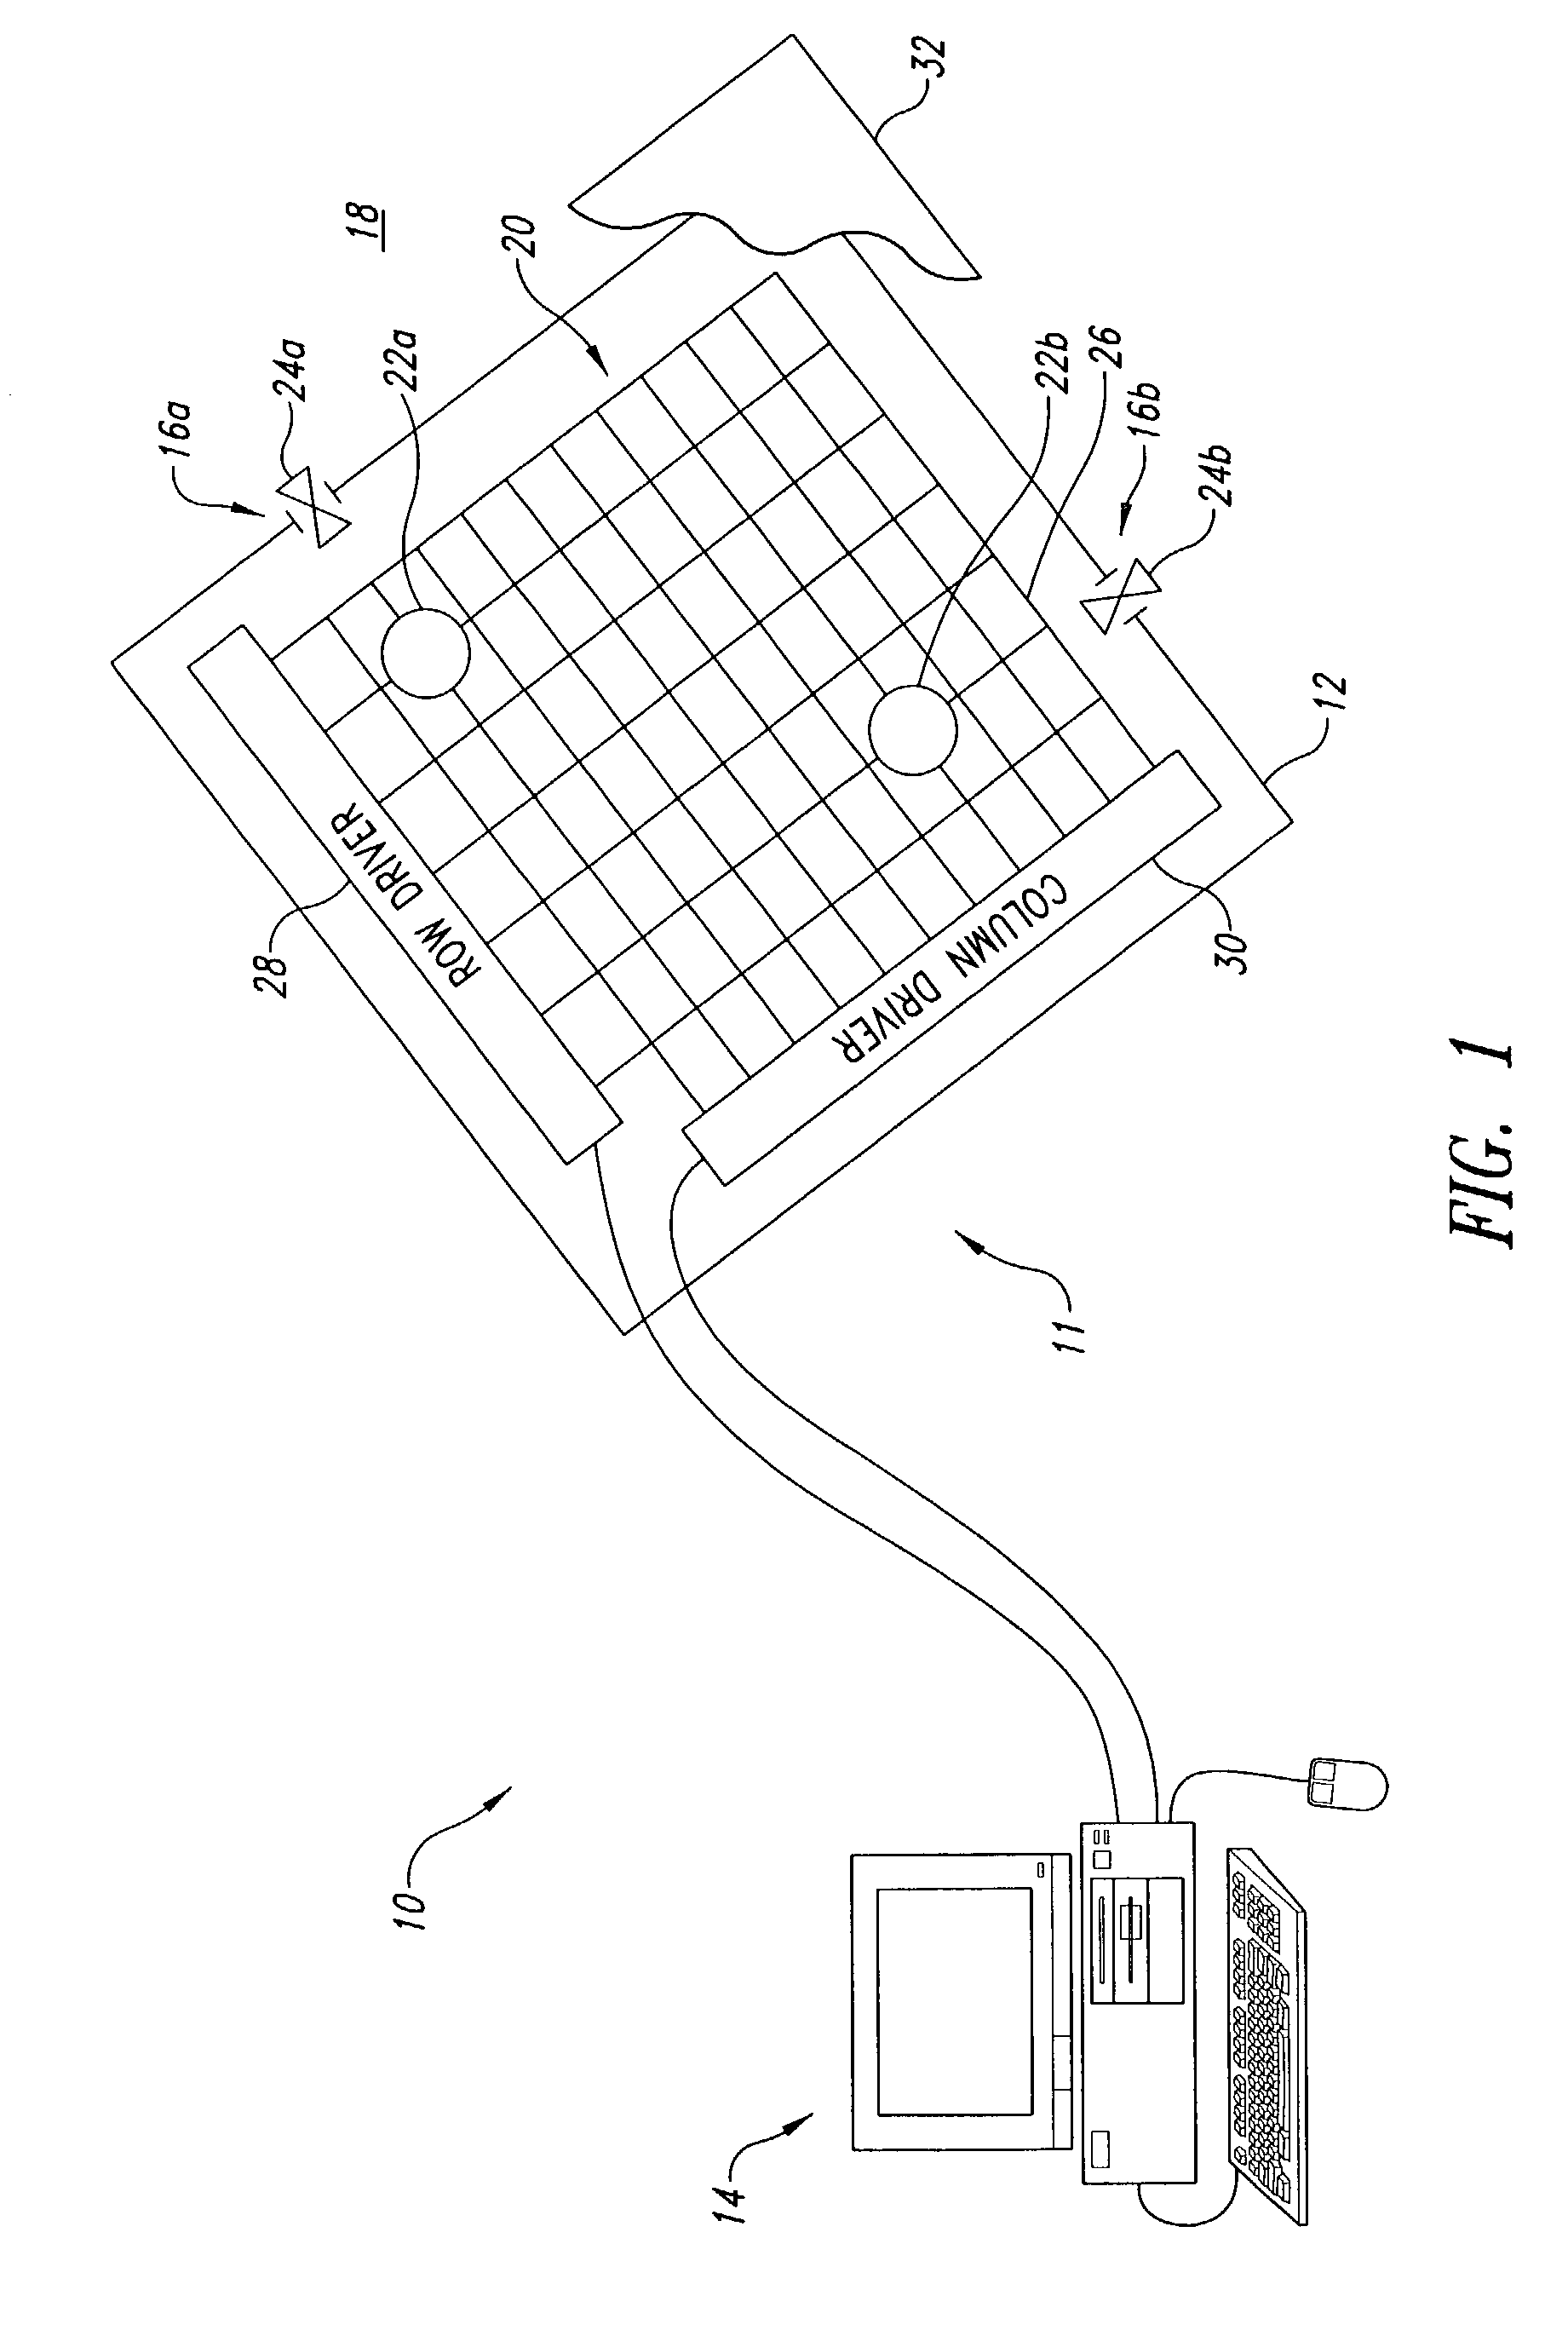 Method, apparatus and article for microfluidic control via electrowetting, for chemical, biochemical and biological assays and the like